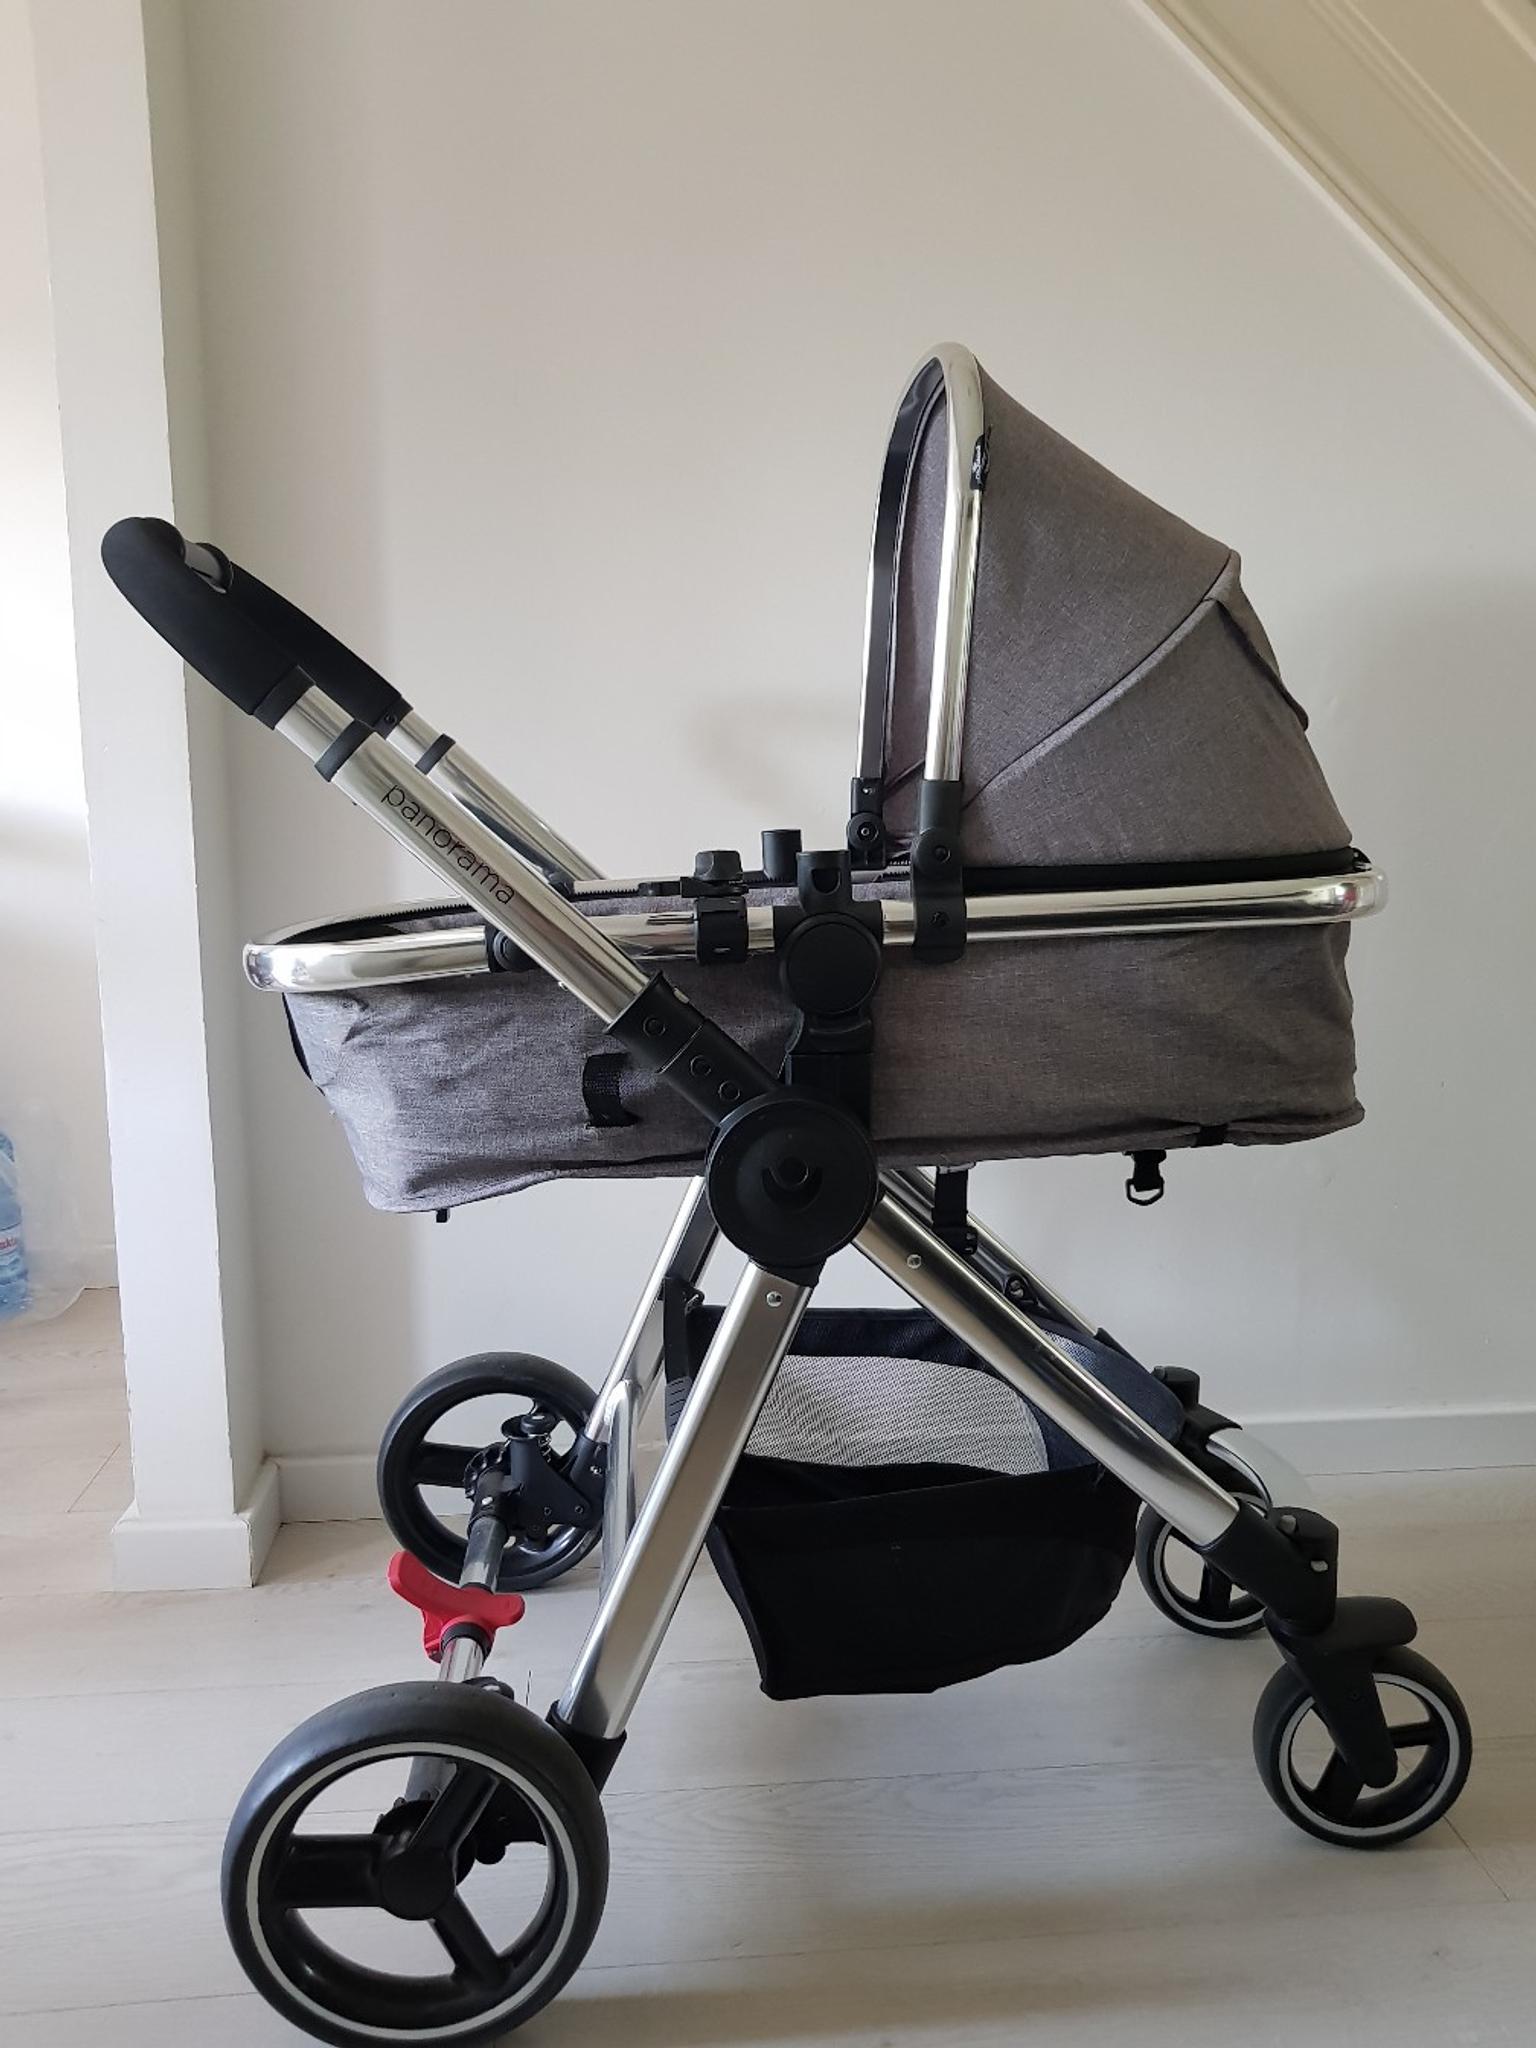 babylo travel system reviews